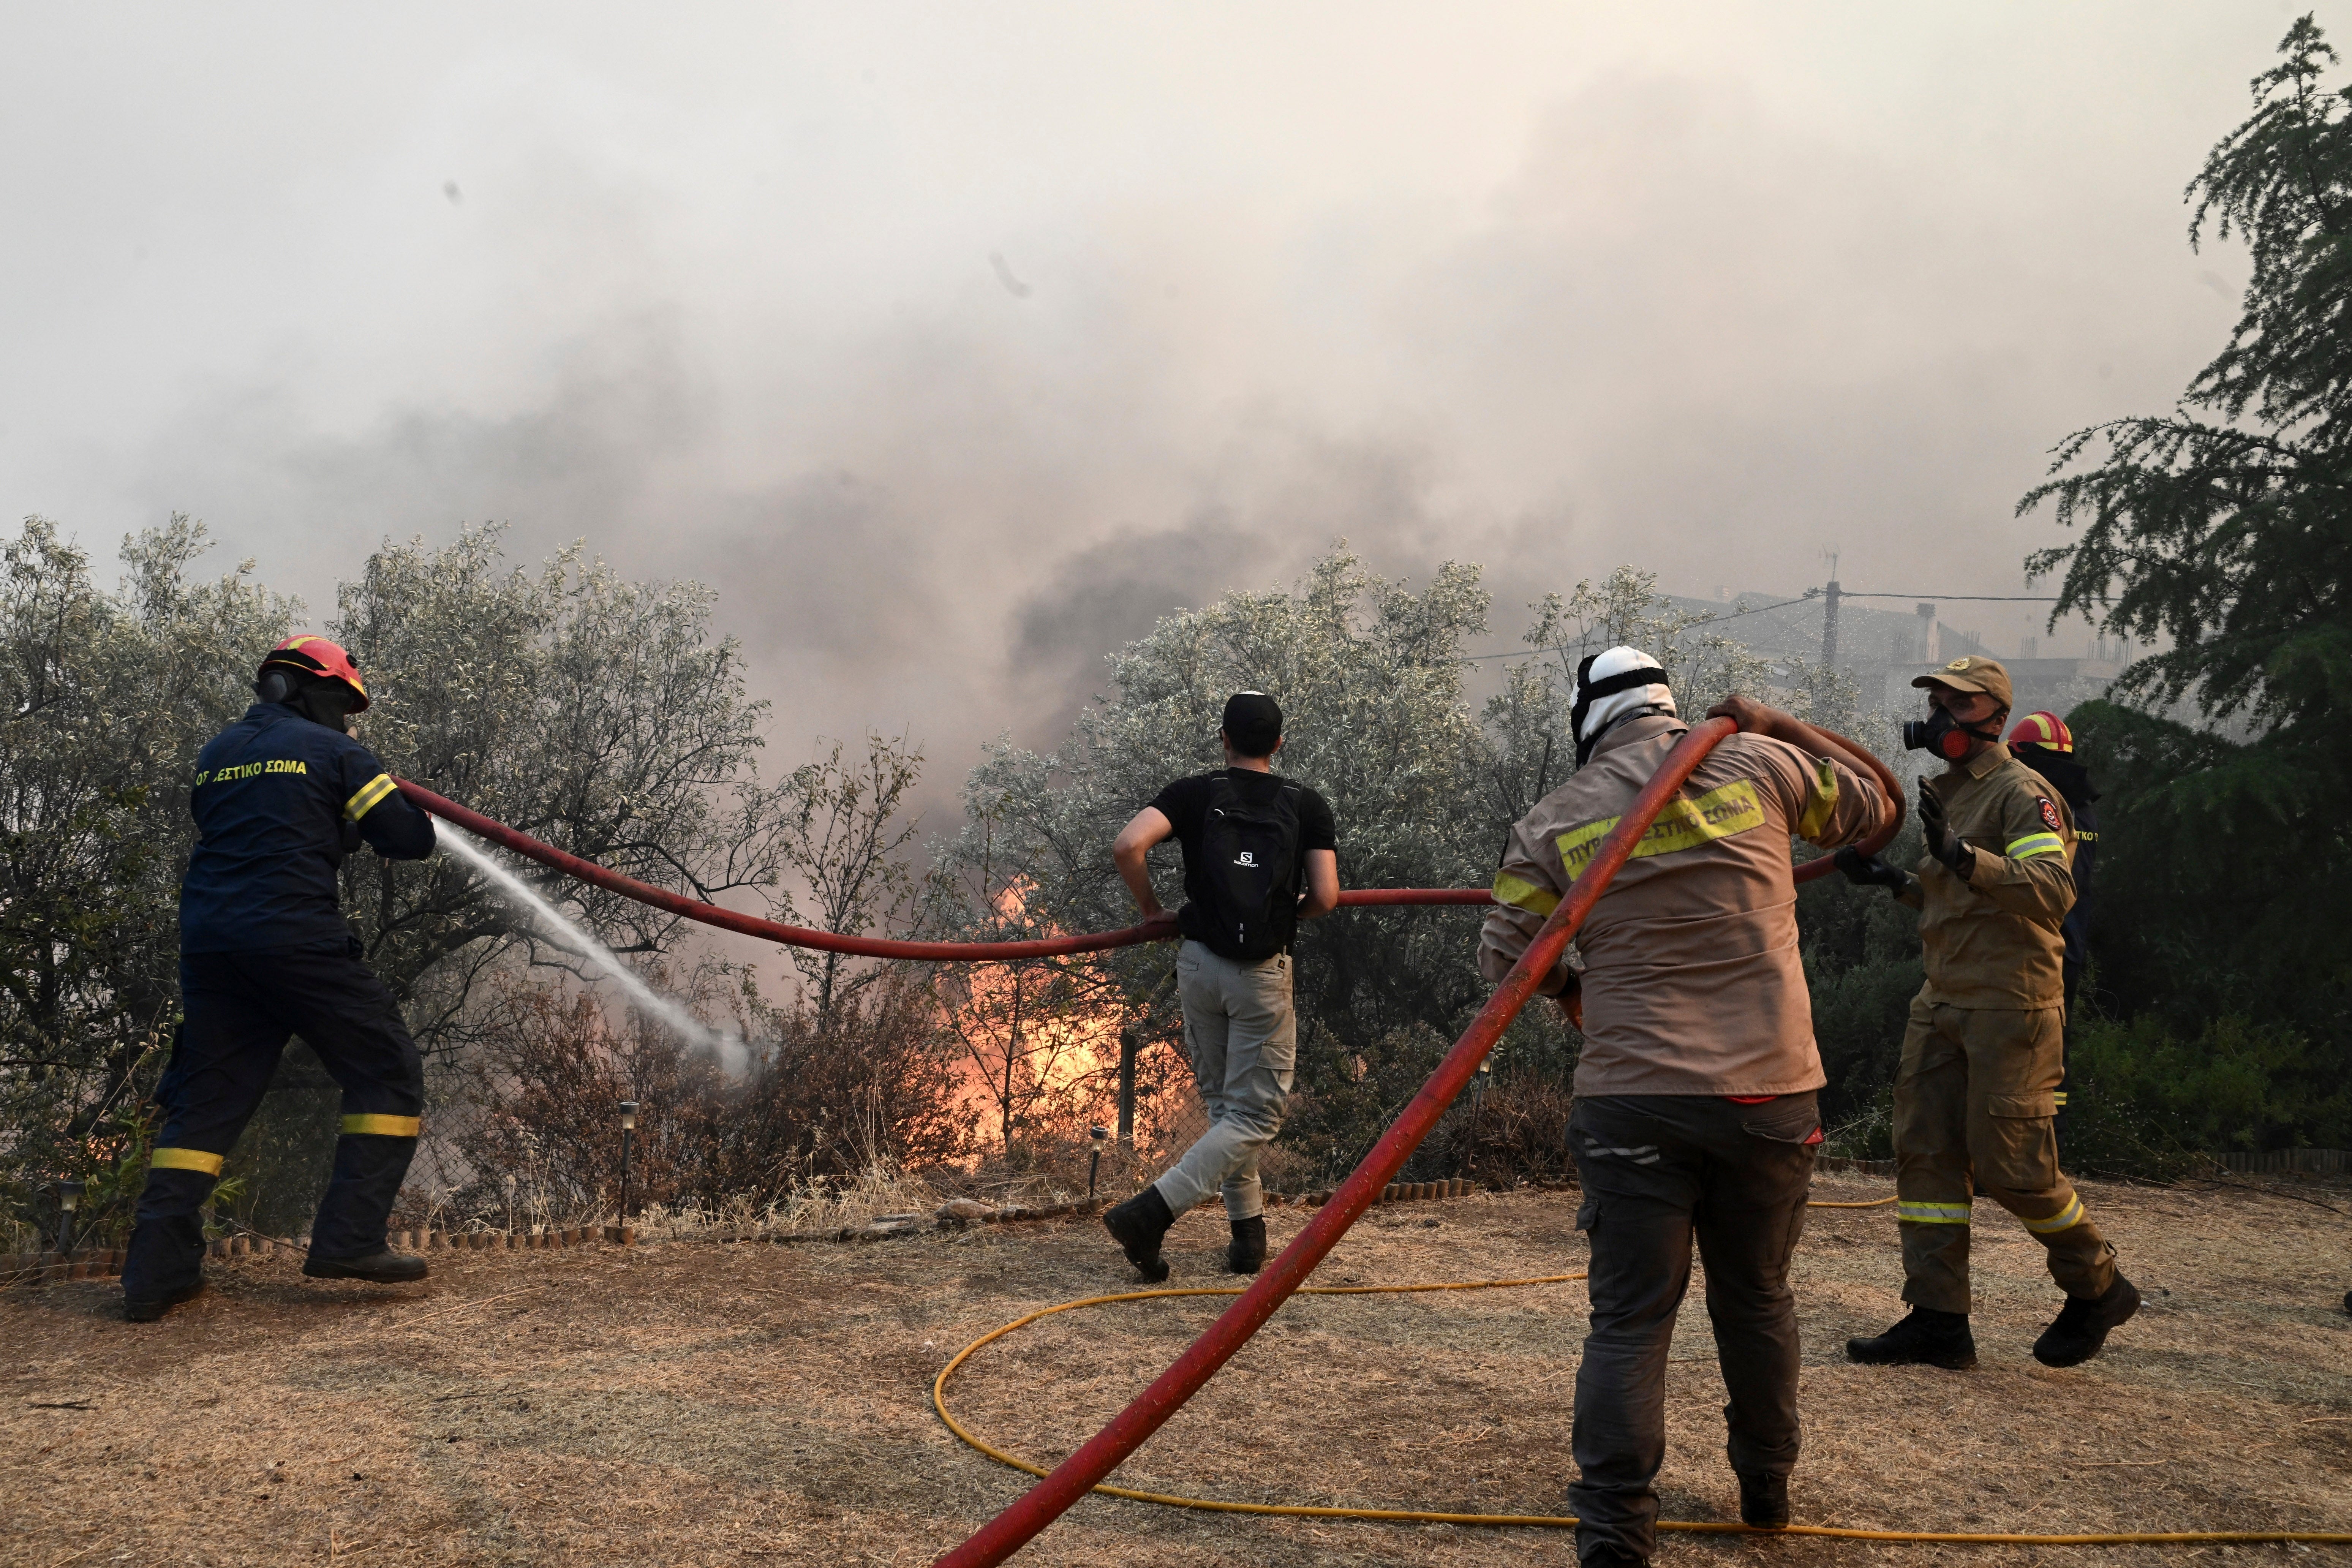 Firefighters and volunteers try to extinguish a wildfire in the town of Nea Anchialos, near Volos city, central Greece